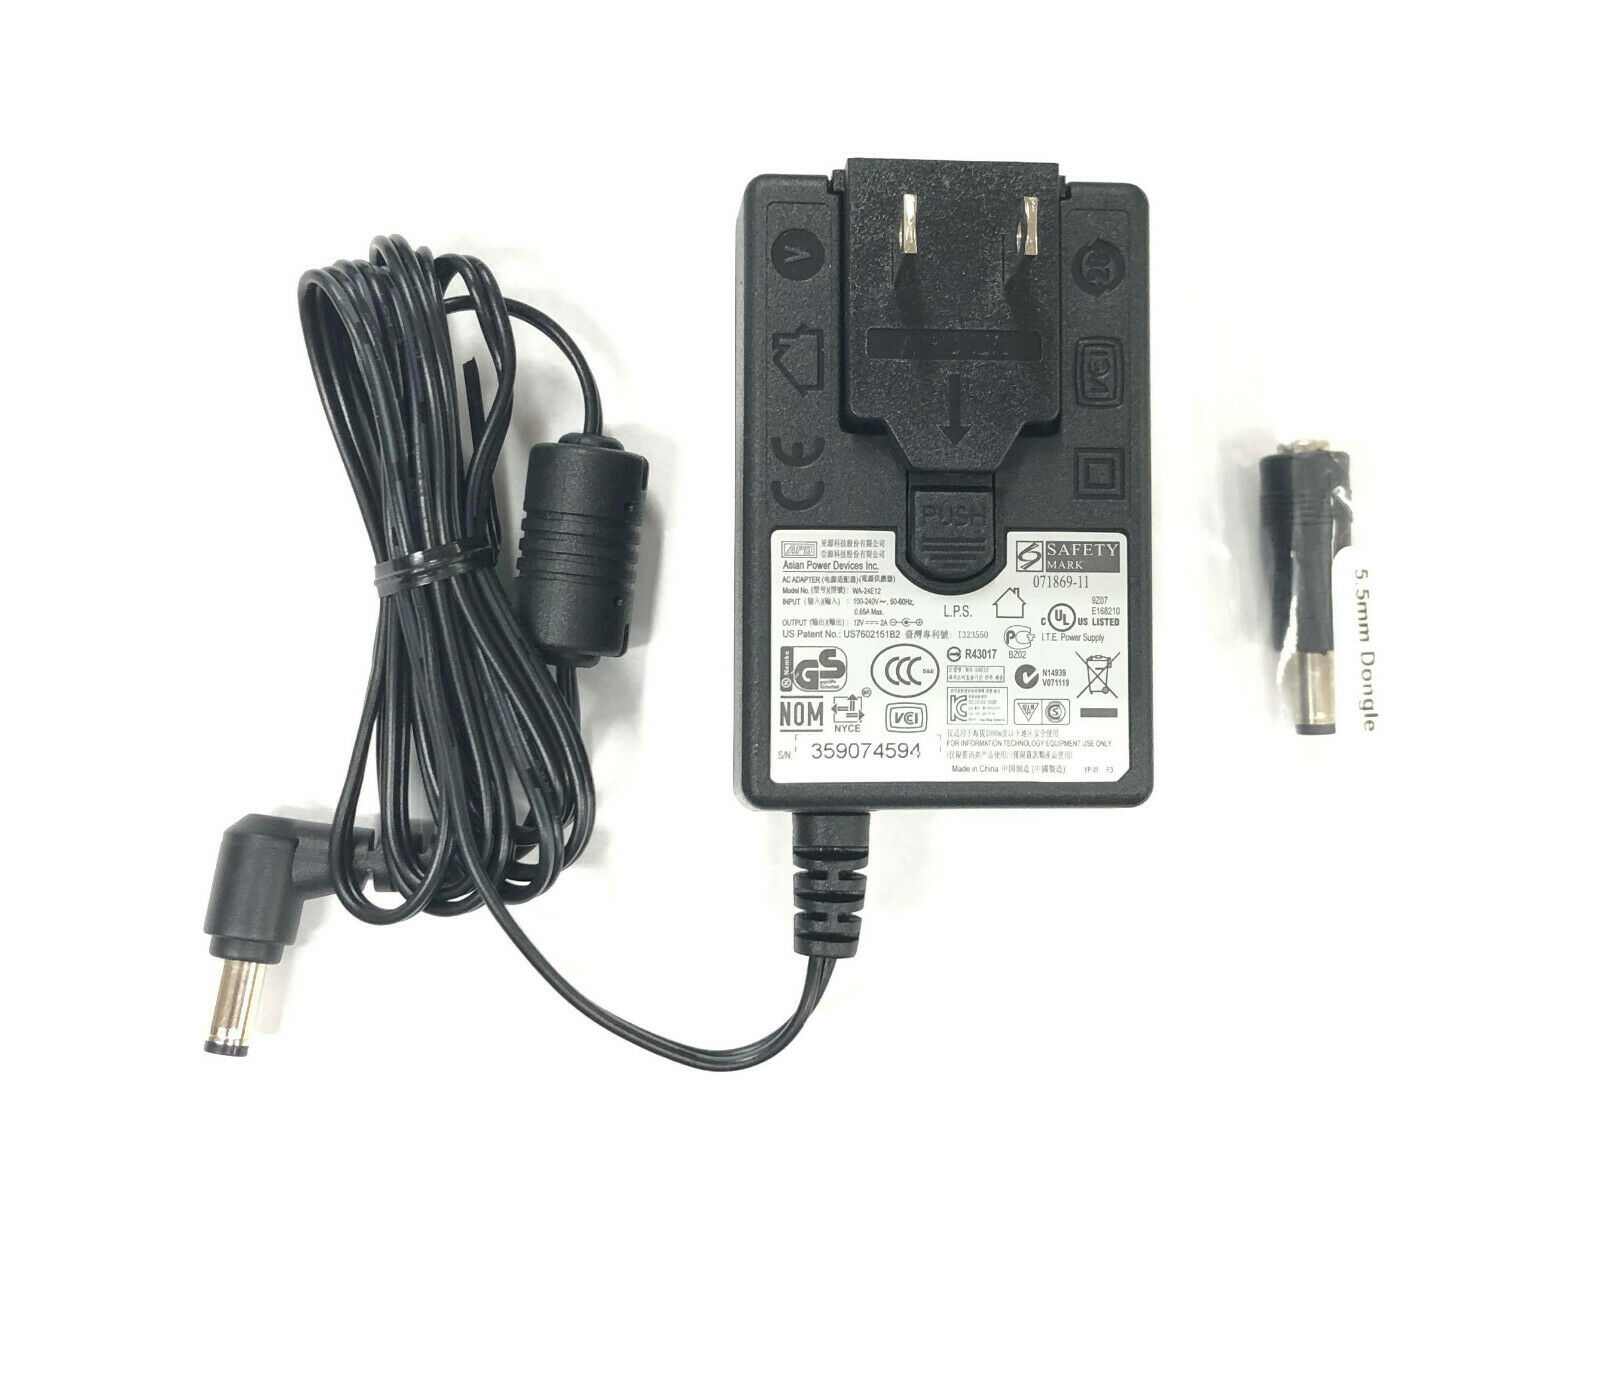 New Geniune ADP AC Adapter WA-24E12 12V For WD My Book Elite: WDBAAH0010HCH Compatible Brand: Wes